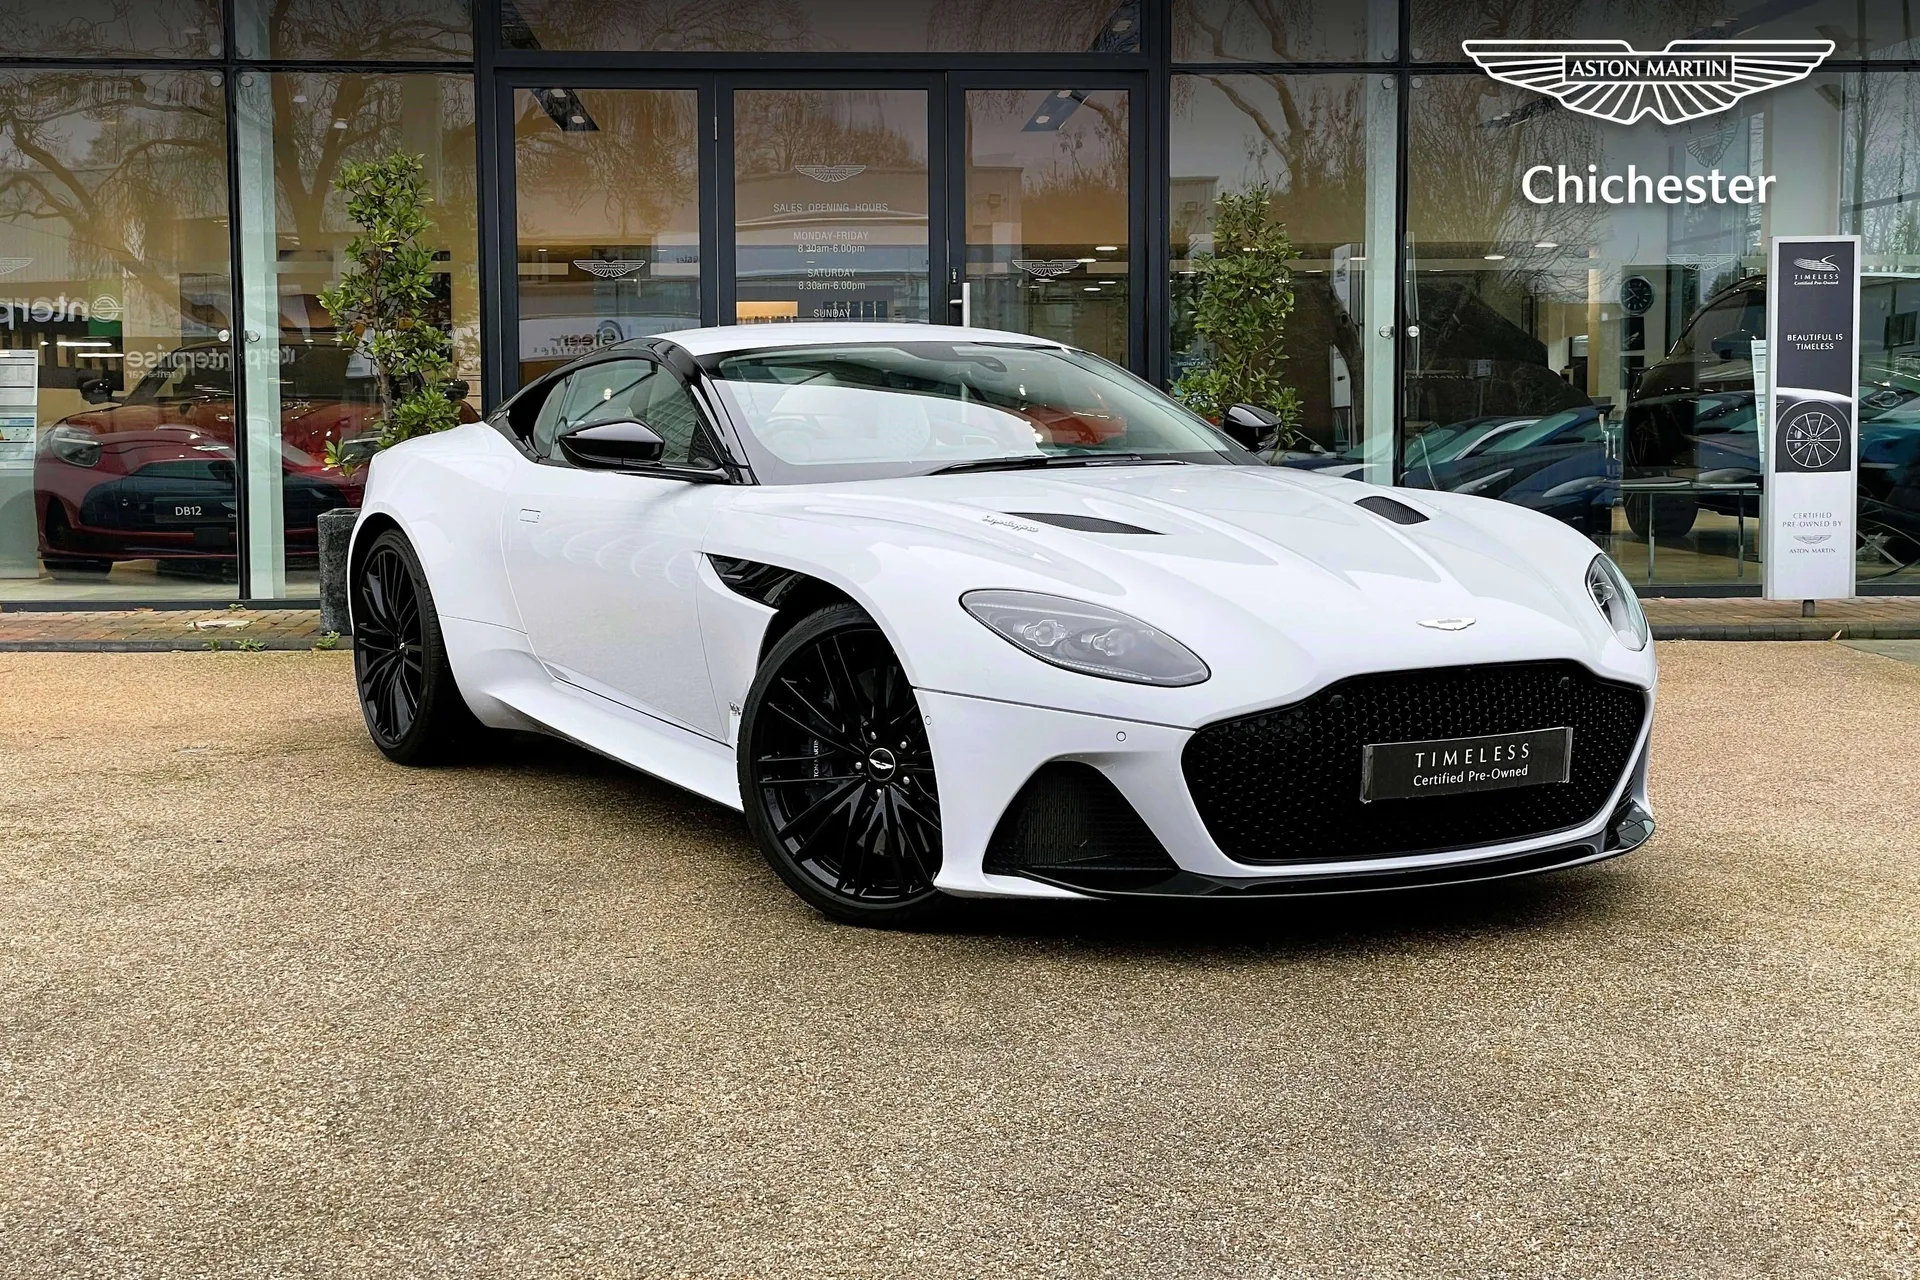 Used Aston Martin For Sale